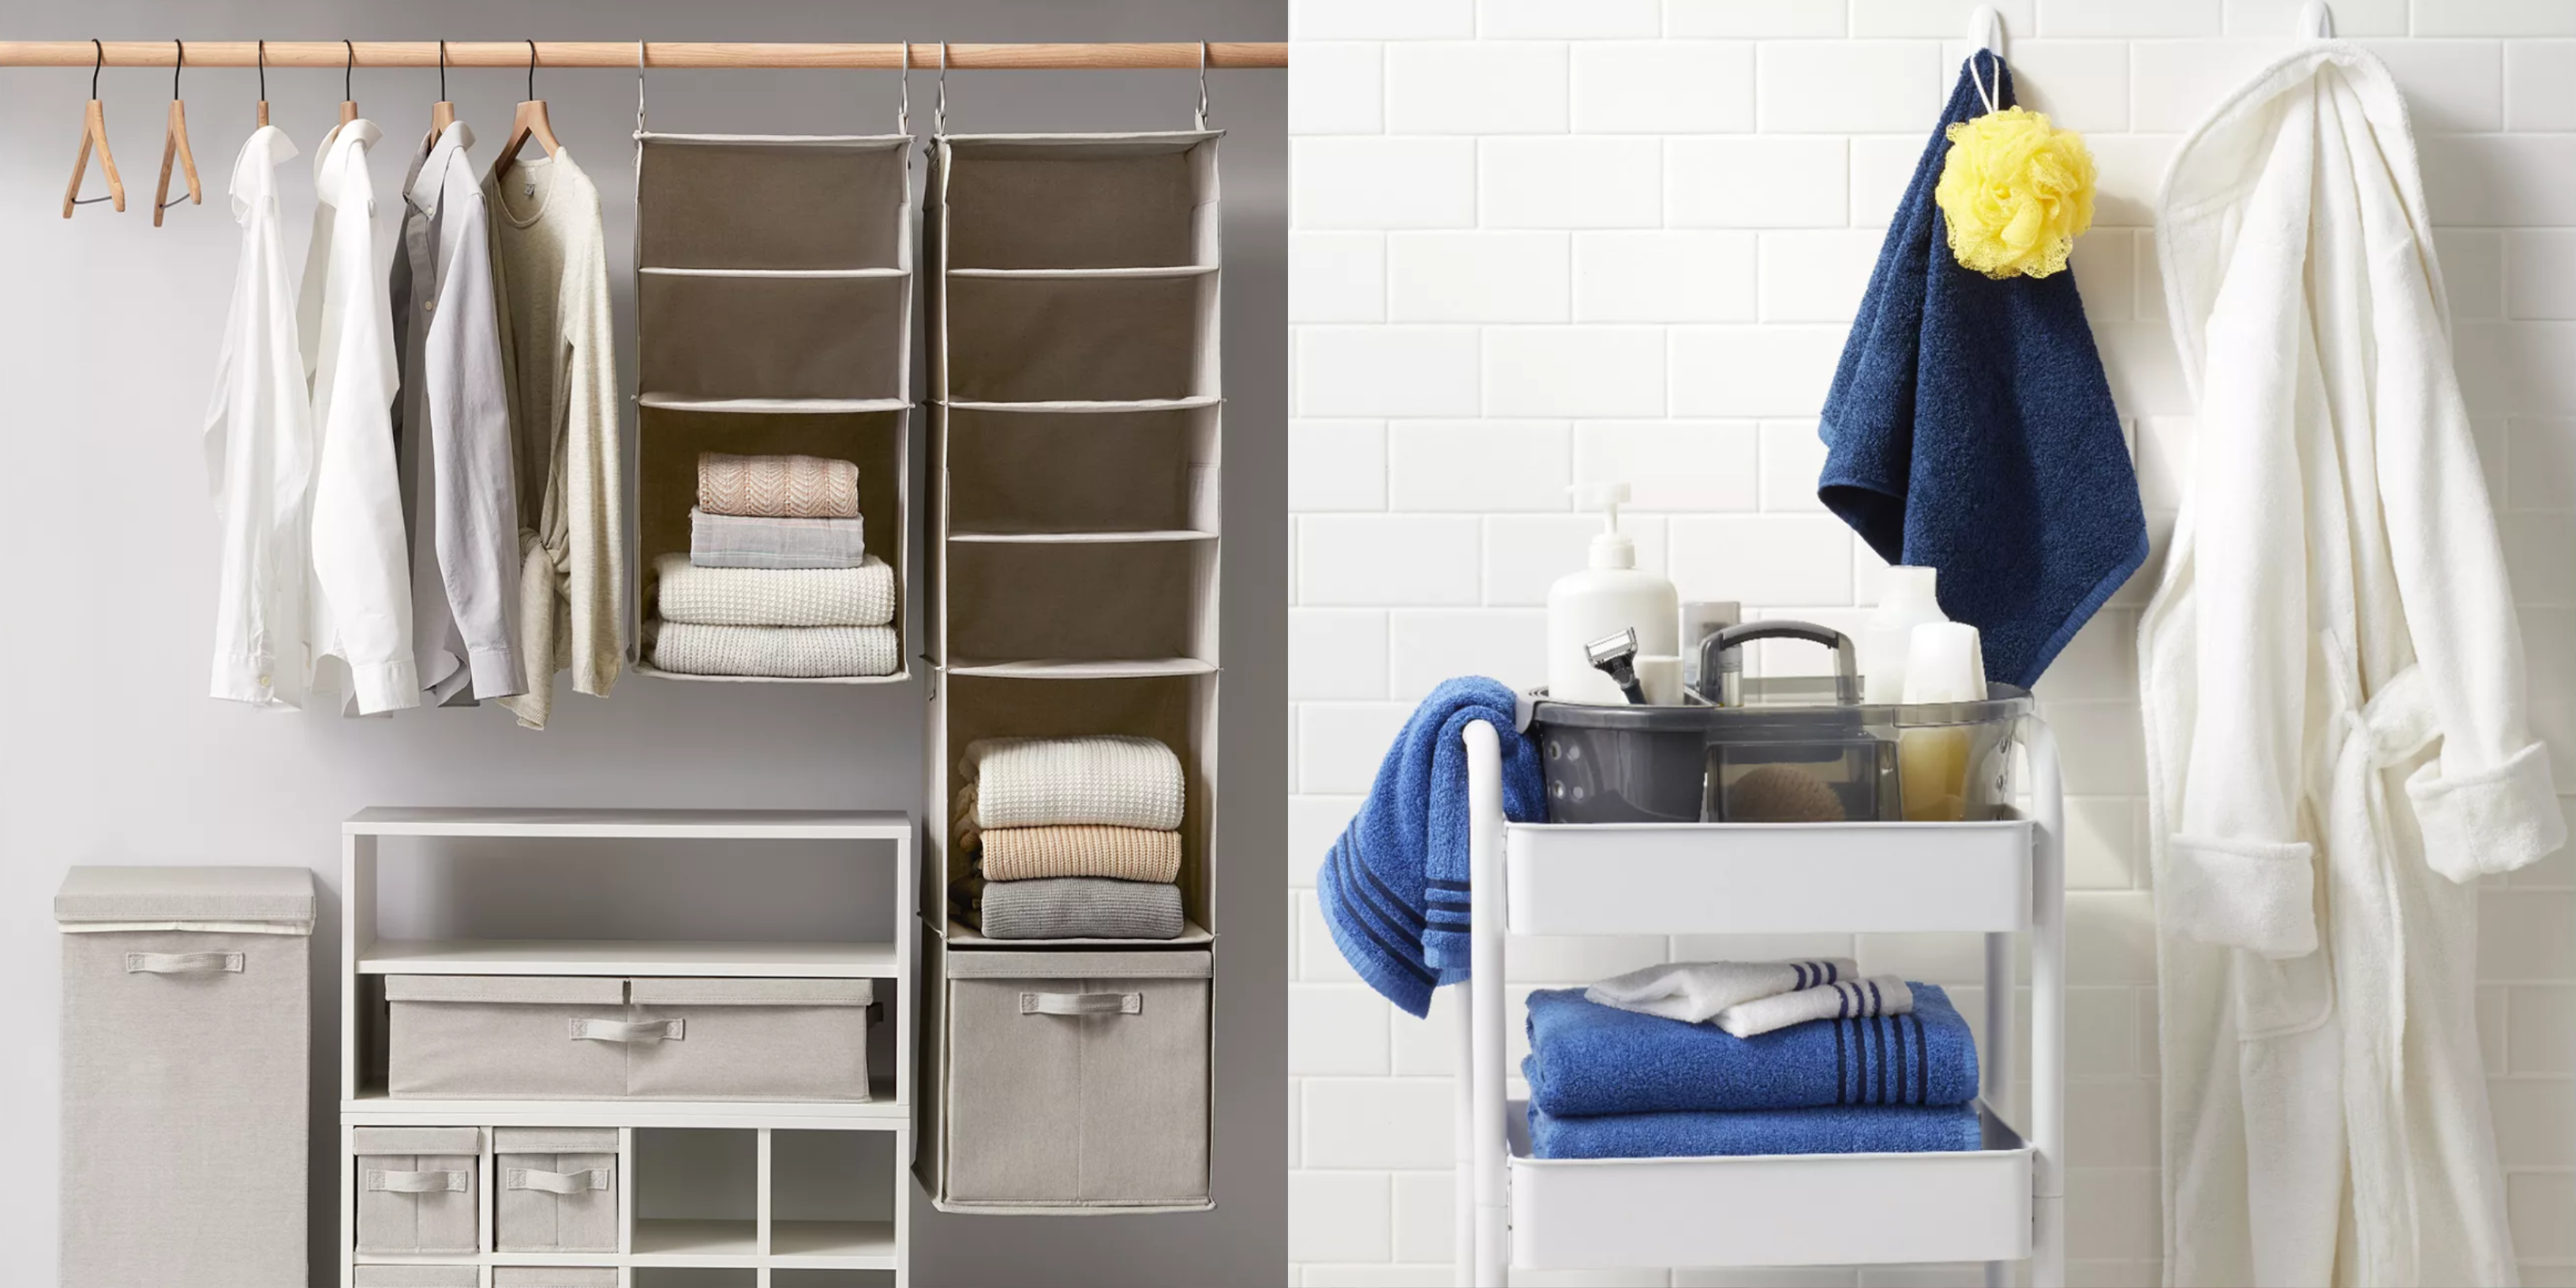 10 Best Organizers and Storage Products at Target - Made By Design  Organizers for Closet, Kitchen, Bathroom